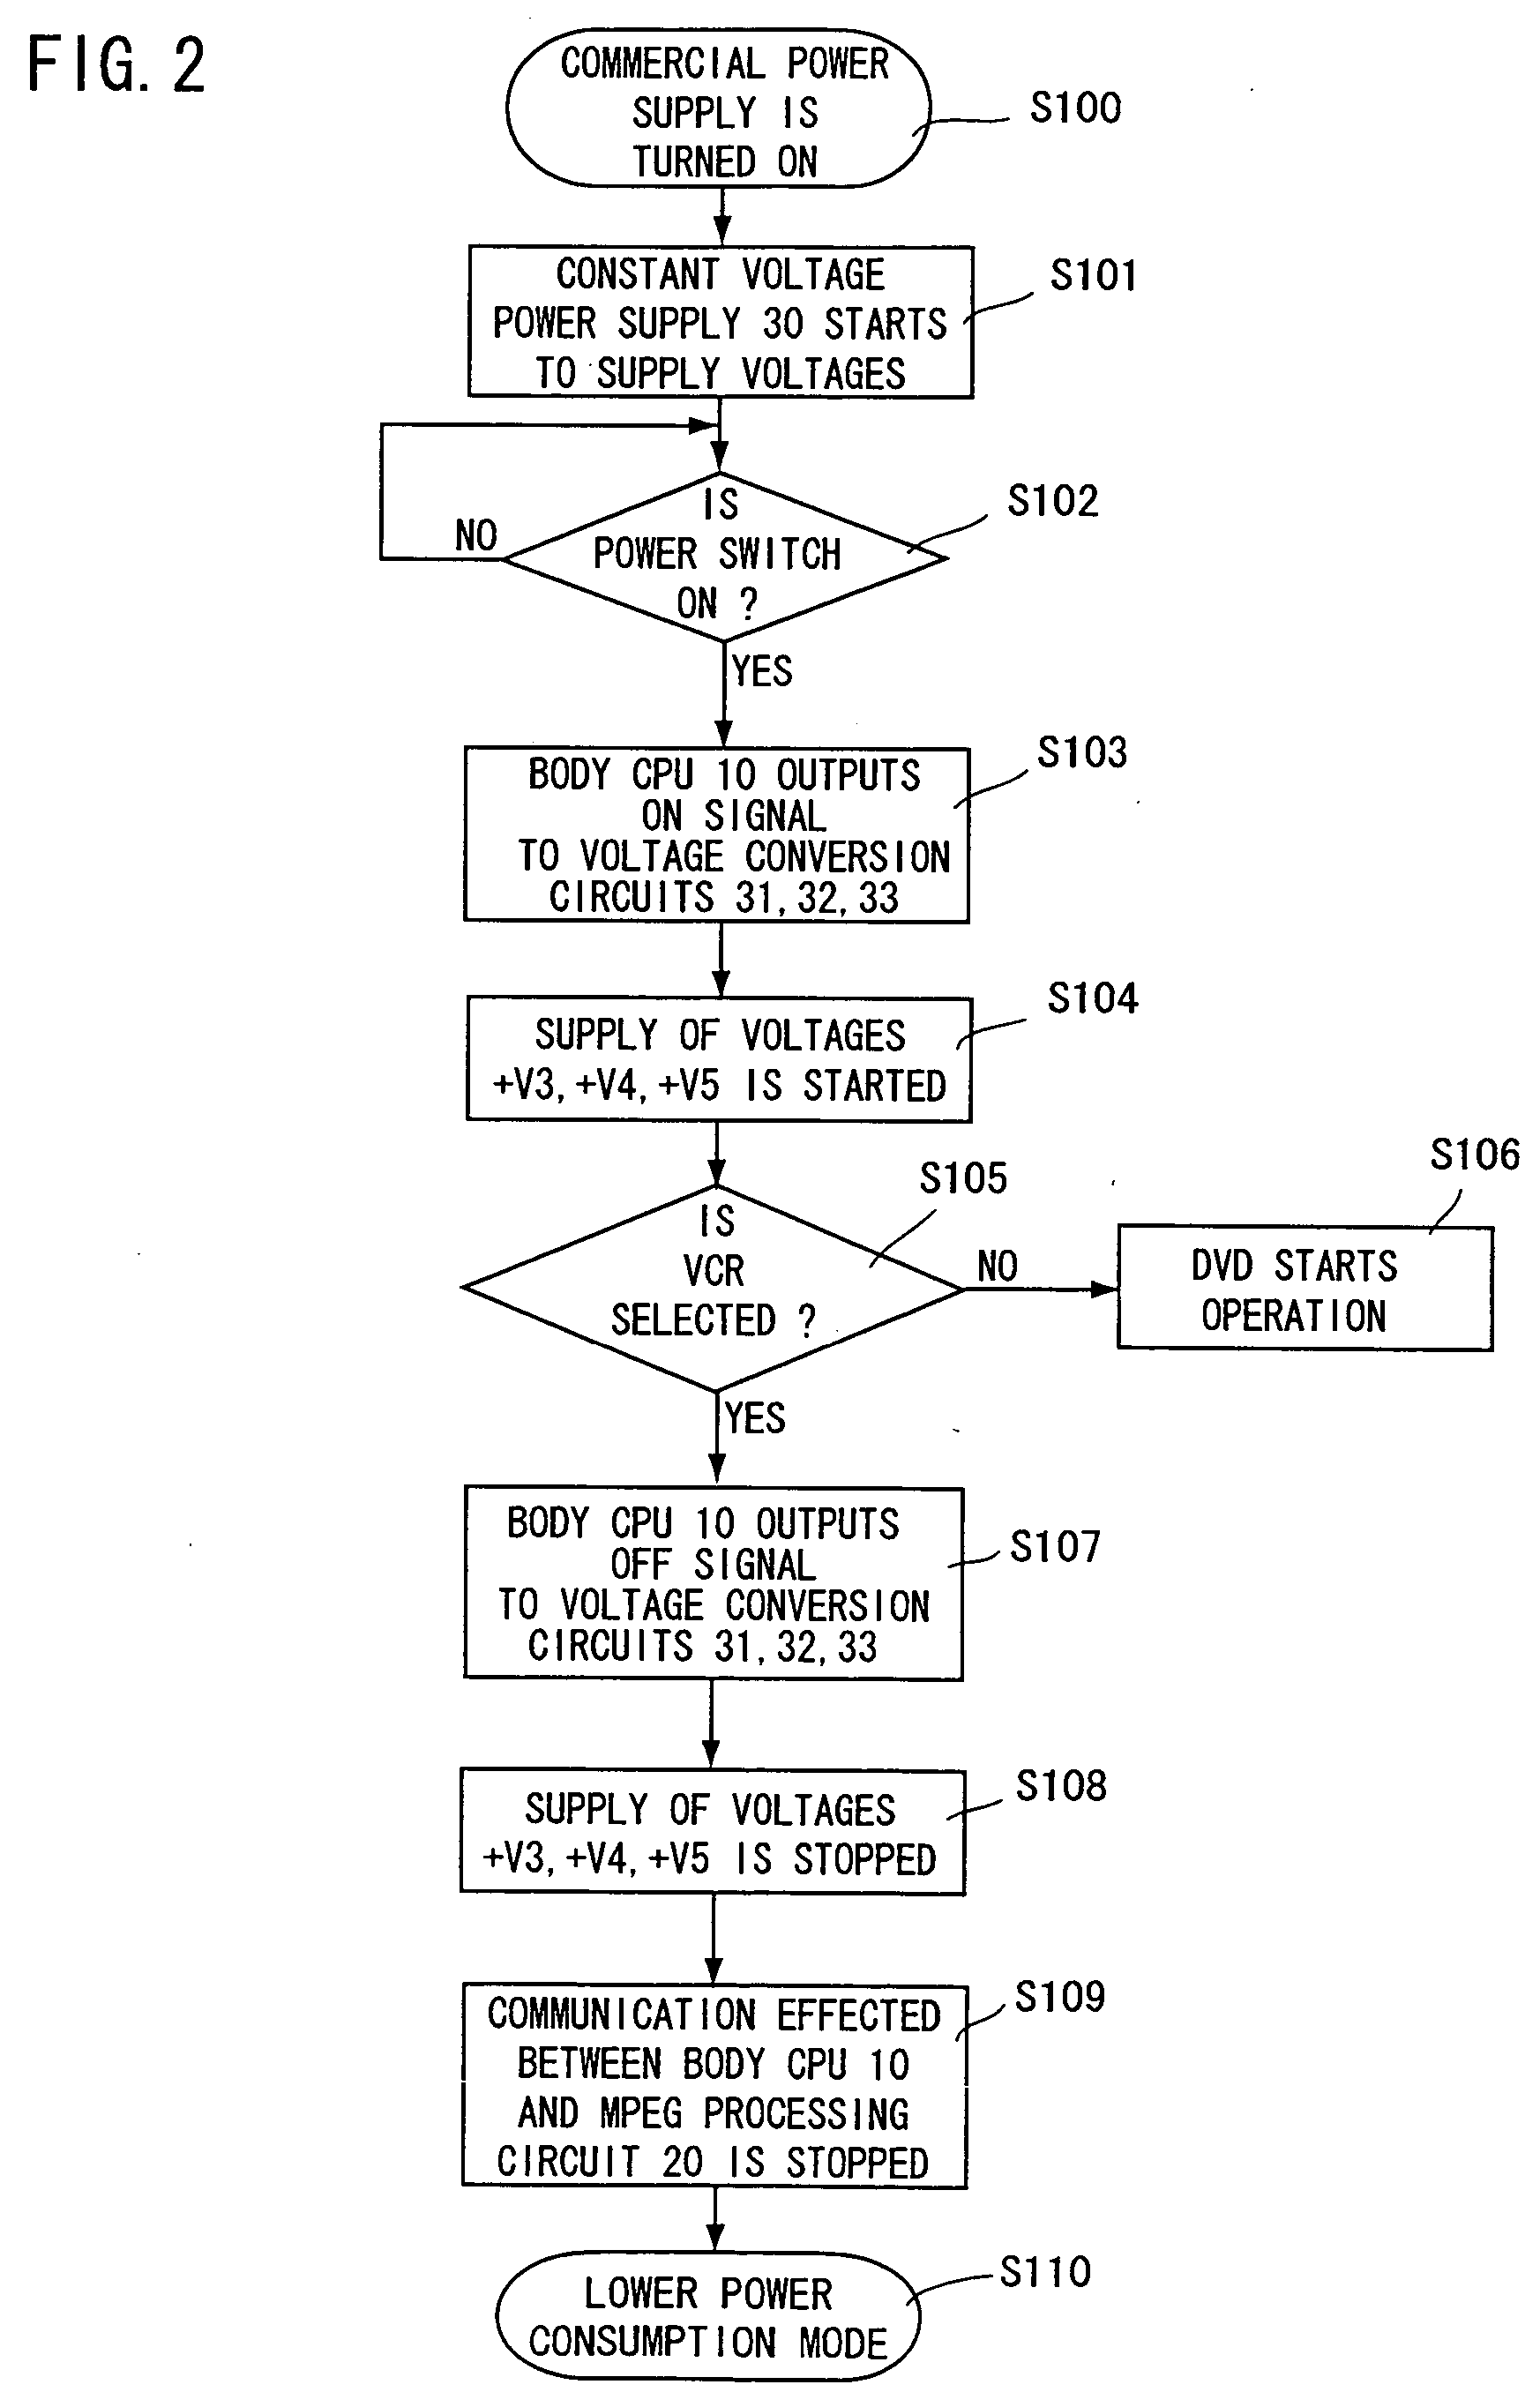 Power controller of combined electronic equipment